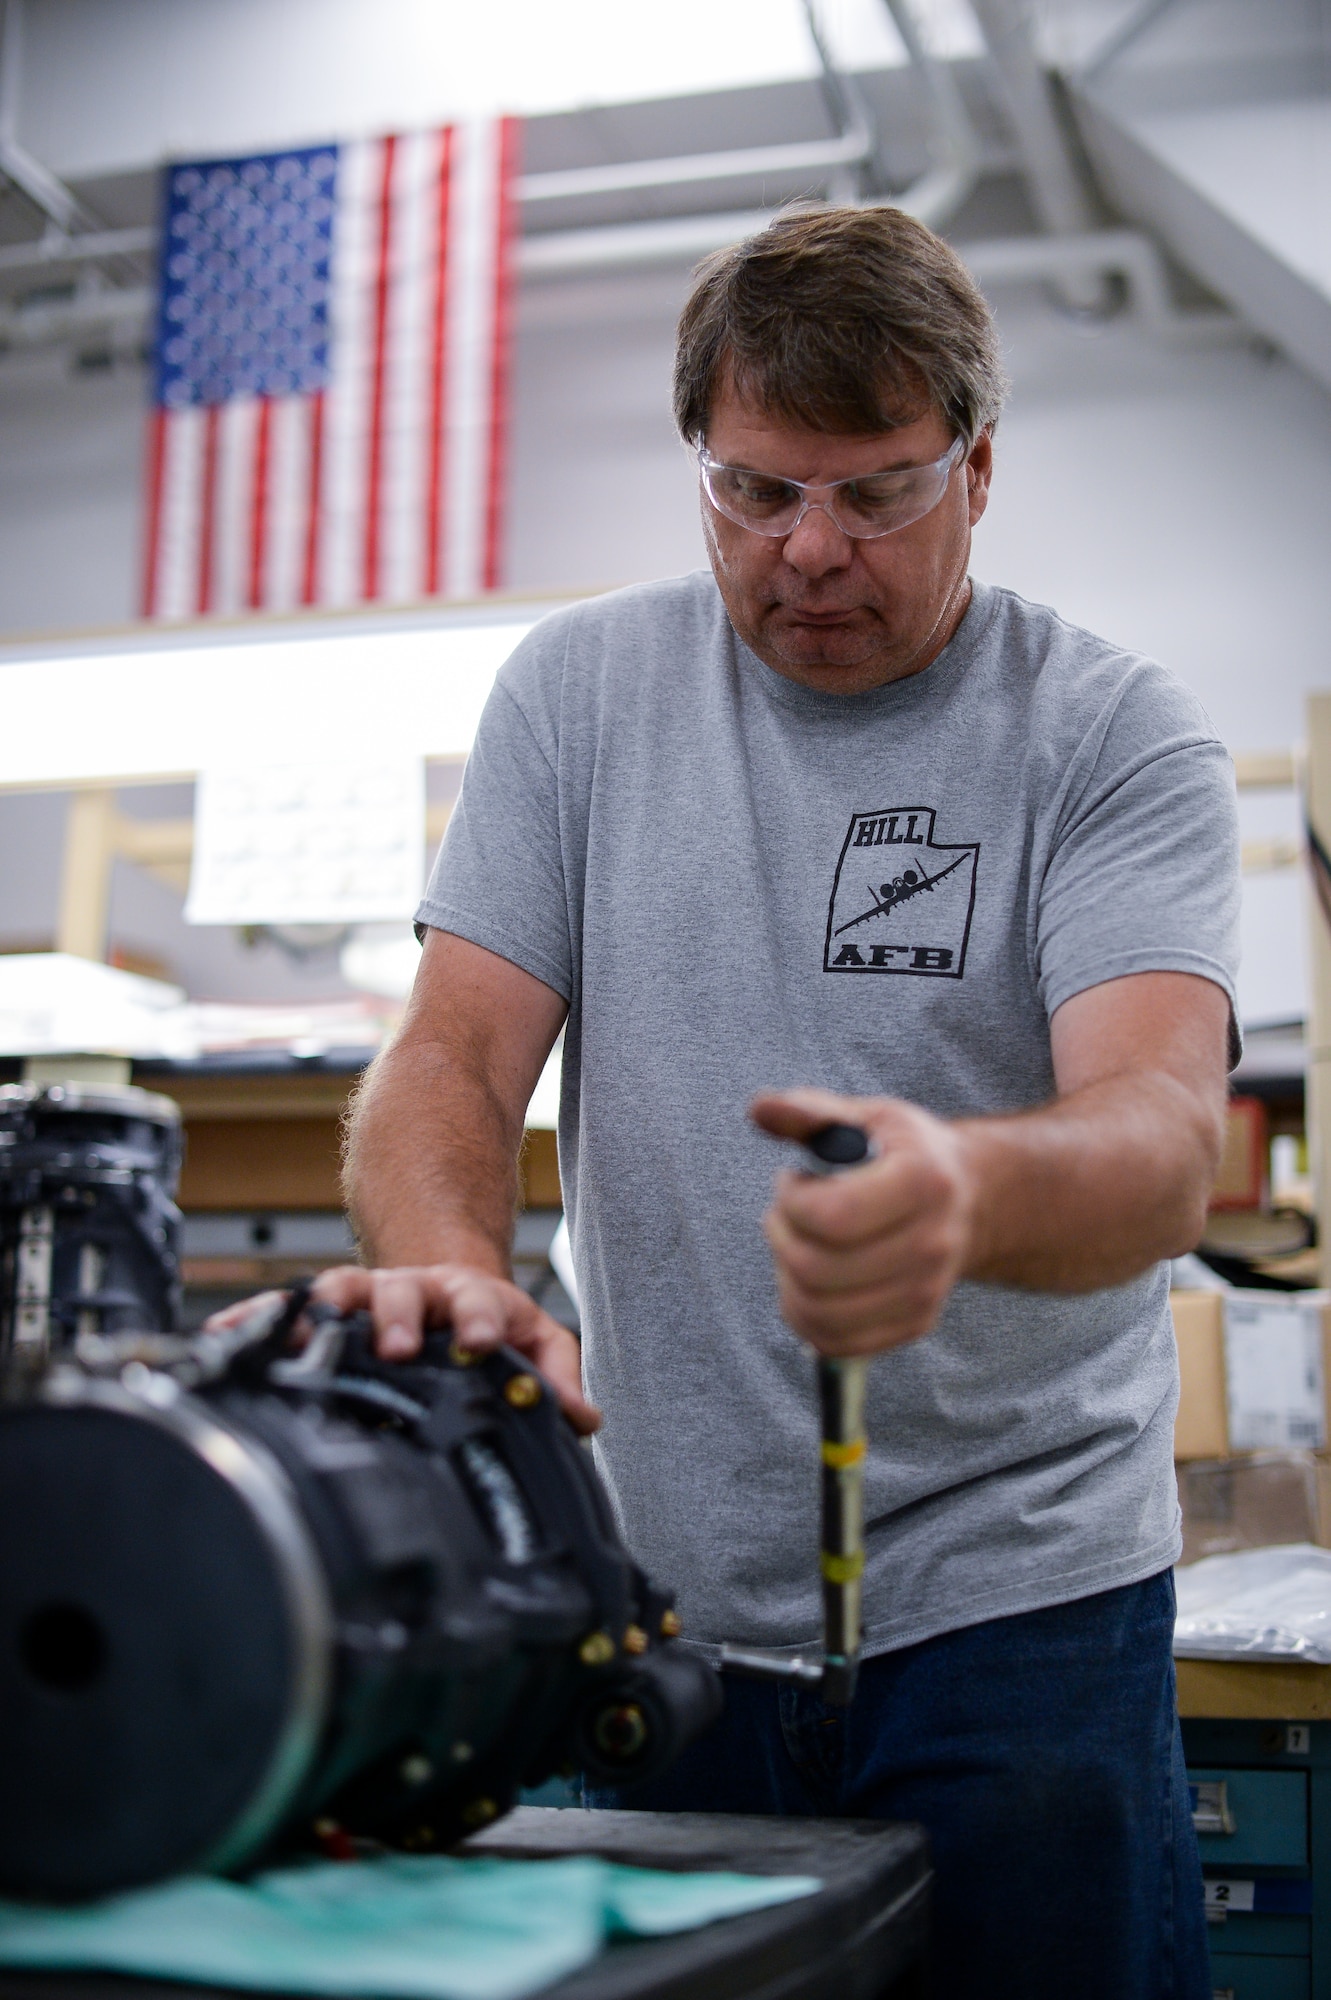 Ken Van Dyk, 531st Commodities Maintenance Squadron, puts the final torque on a 20 mm gun housing before it is to be test fired at Hill Air Force Base, Utah, May 25, 2016. (U.S. Air Force photo by R. Nial Bradshaw)